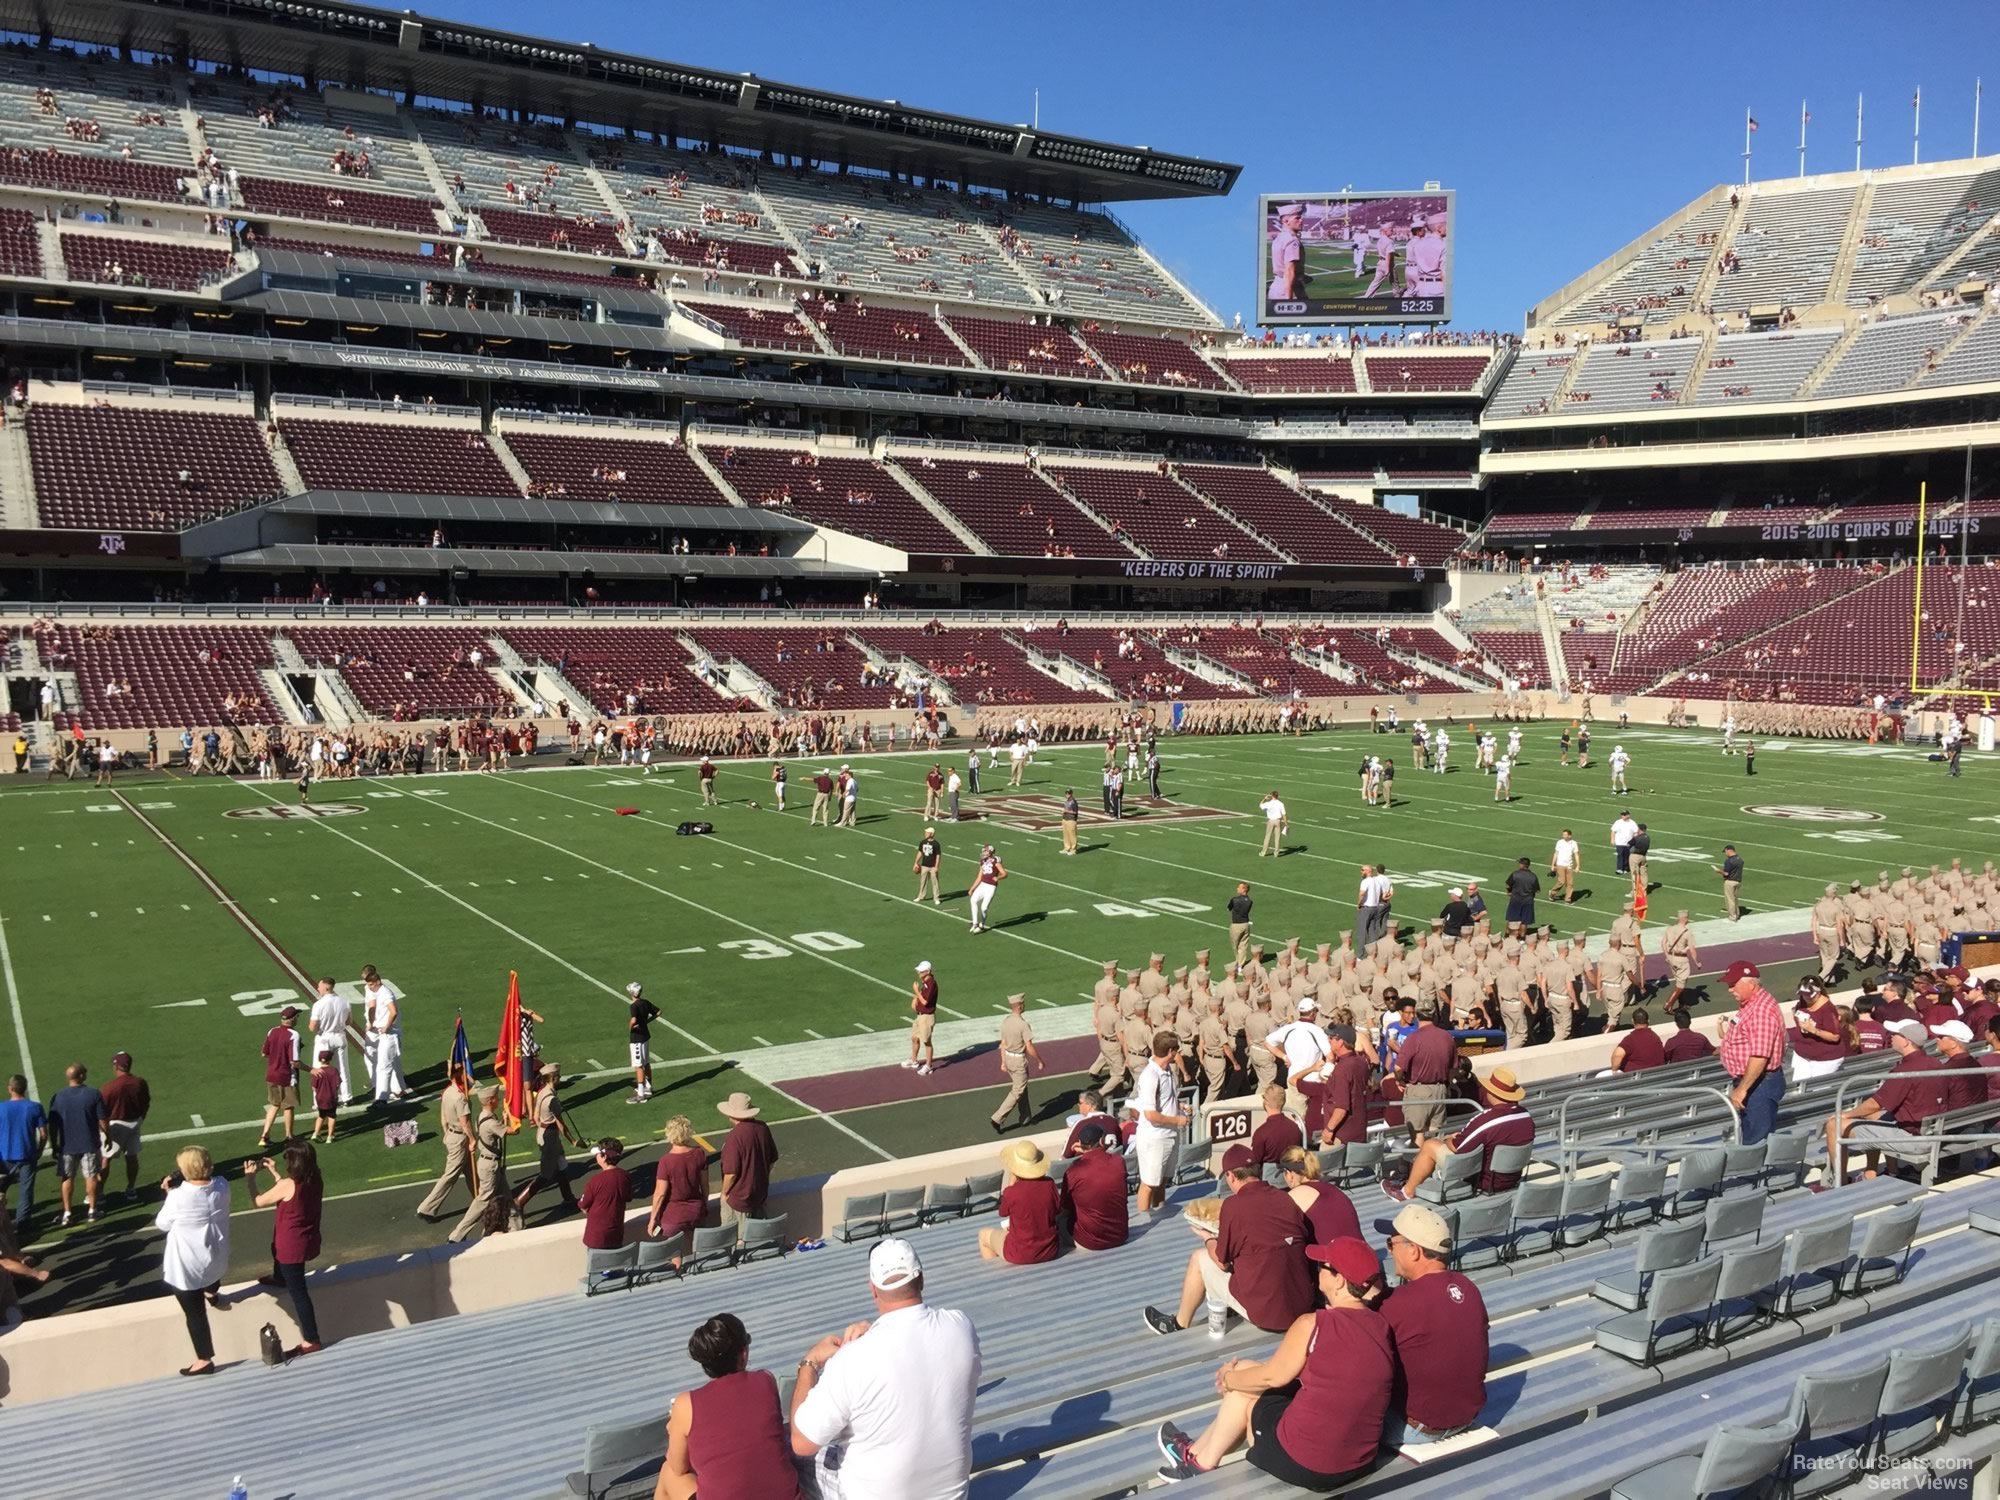 section 127, row 20 seat view  - kyle field